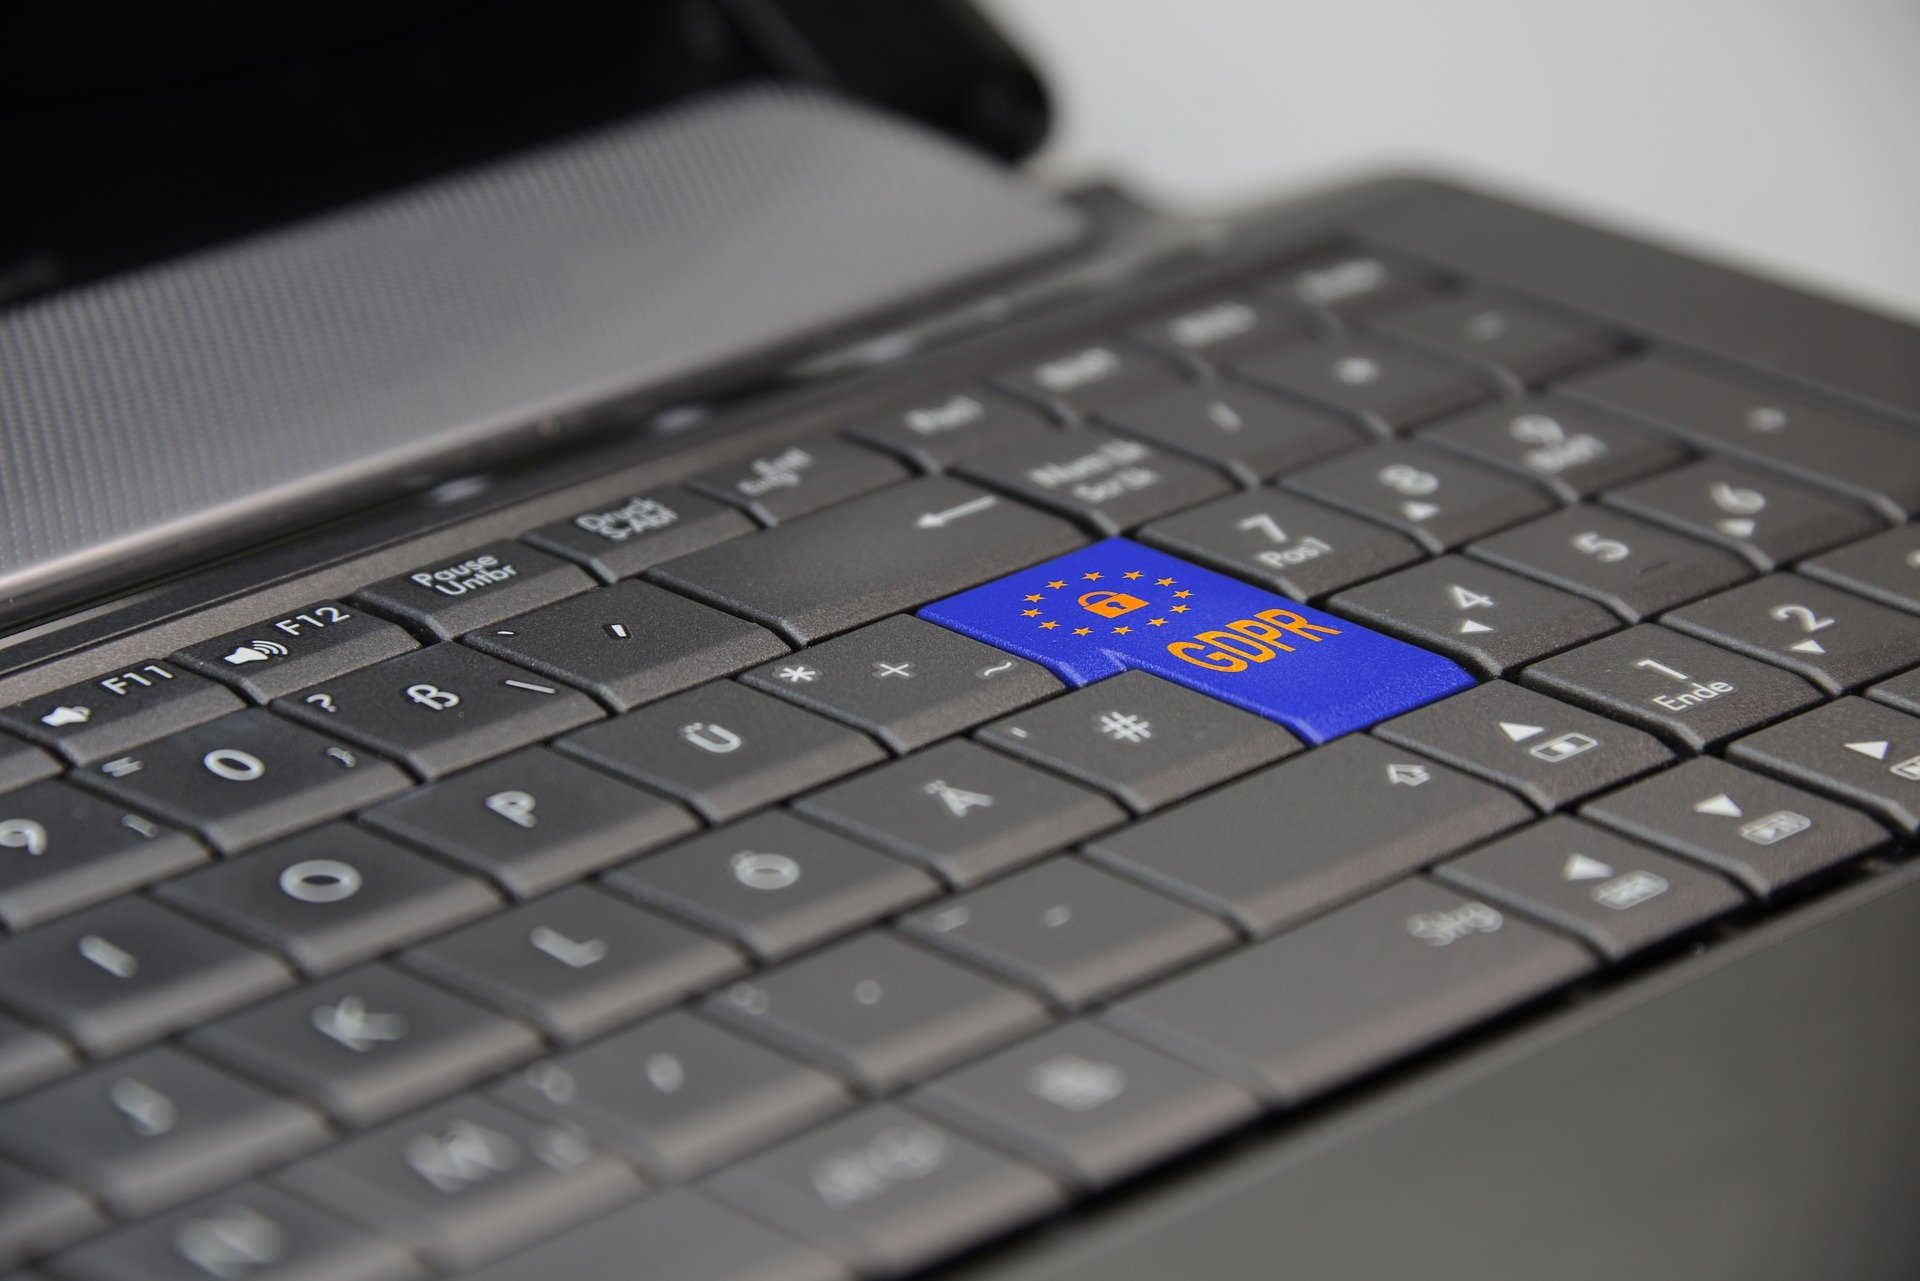 Laptop with GDPR on one of the keys